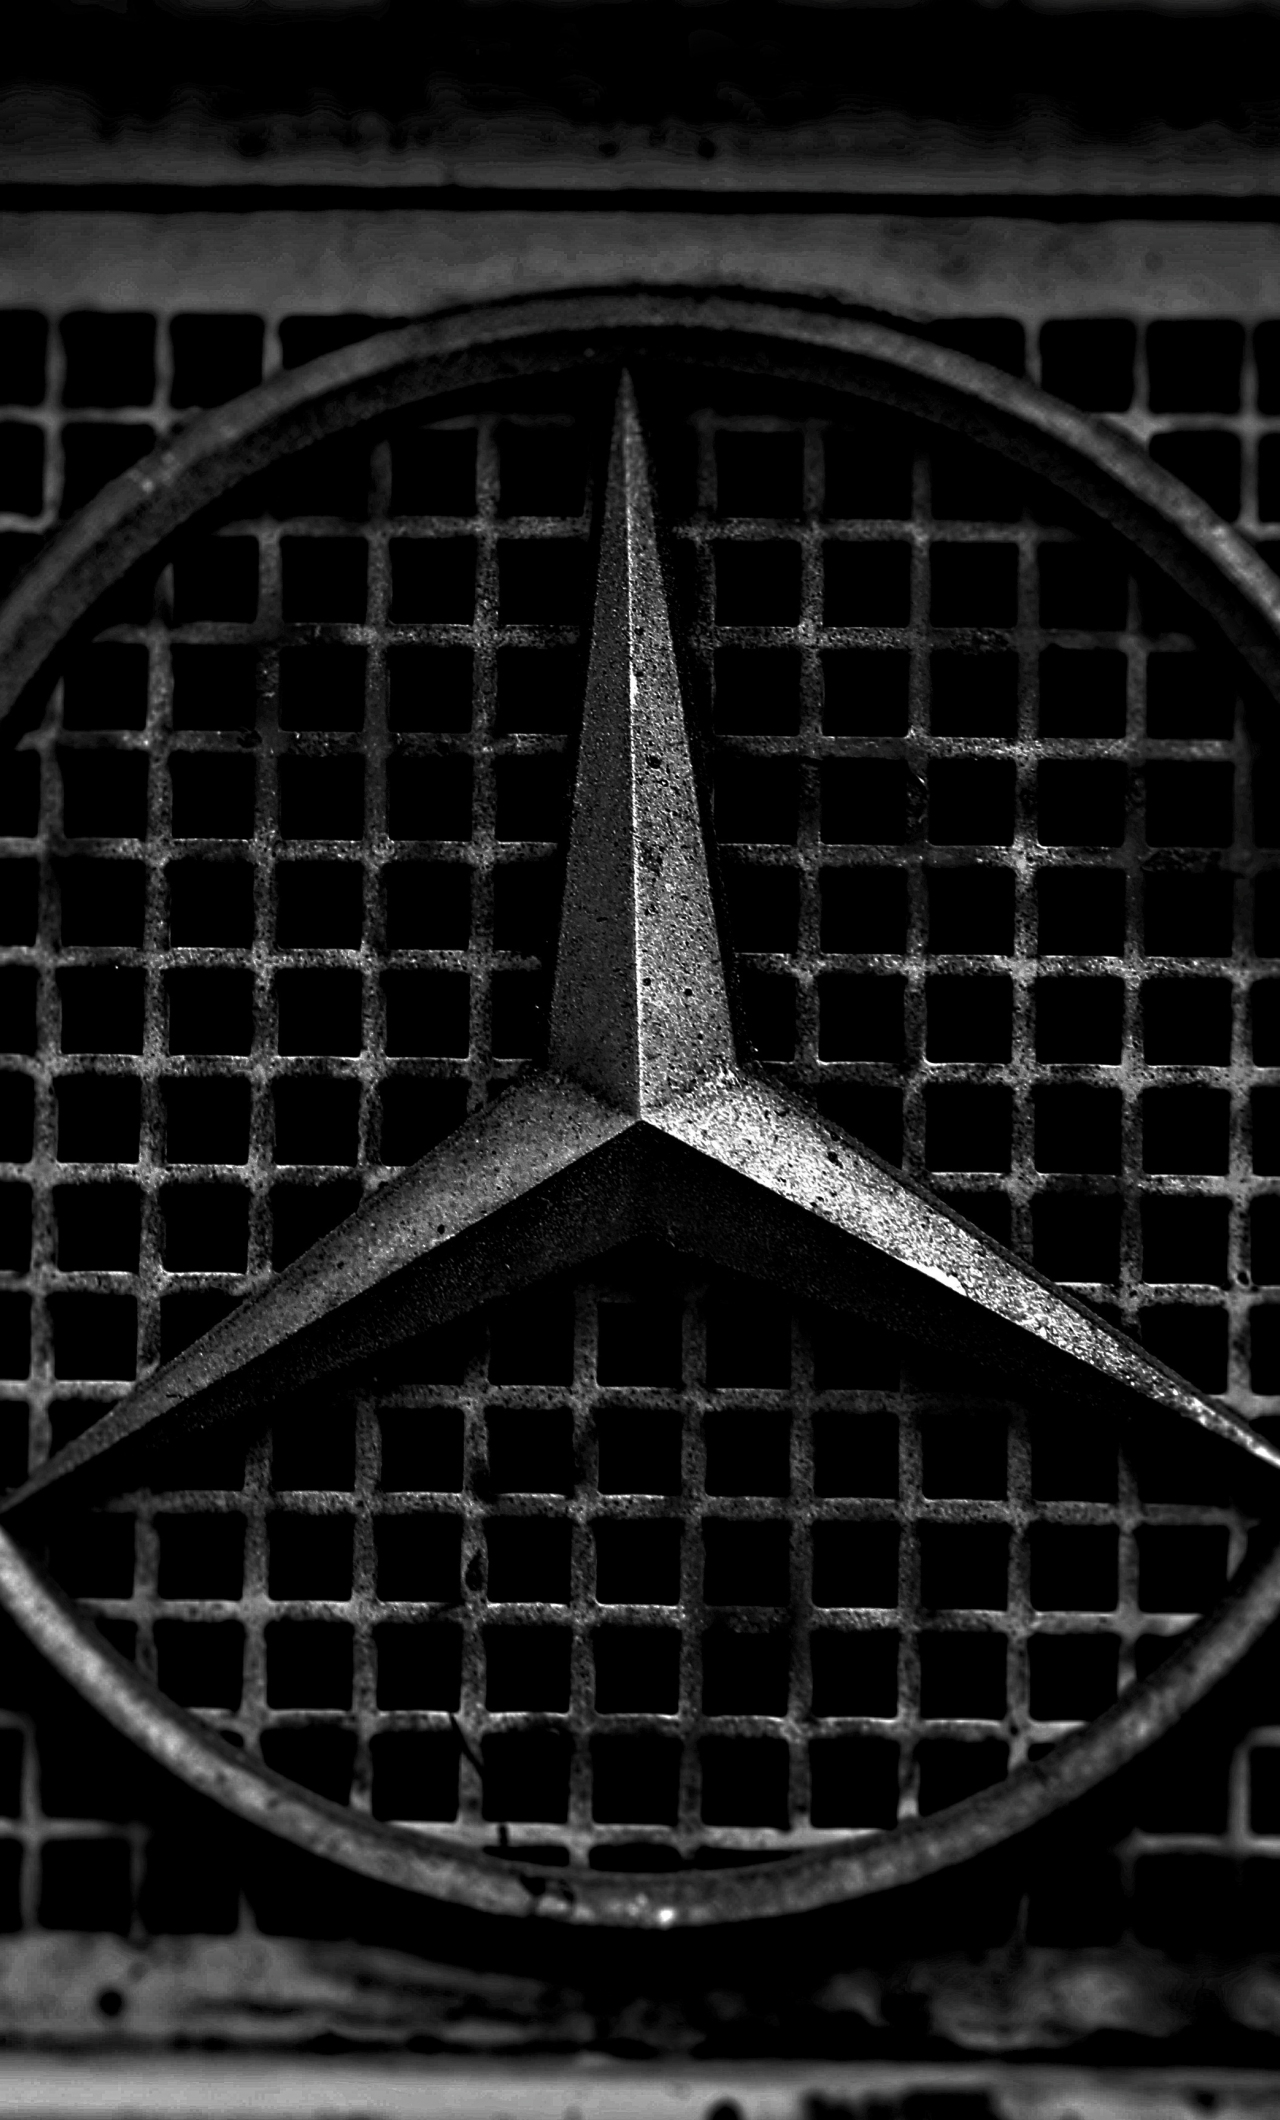 Download 1280x2120 Wallpaper Old Car Mercedes Benz Logo Iphone 6 Plus 1280x2120 Hd Image Background 4315